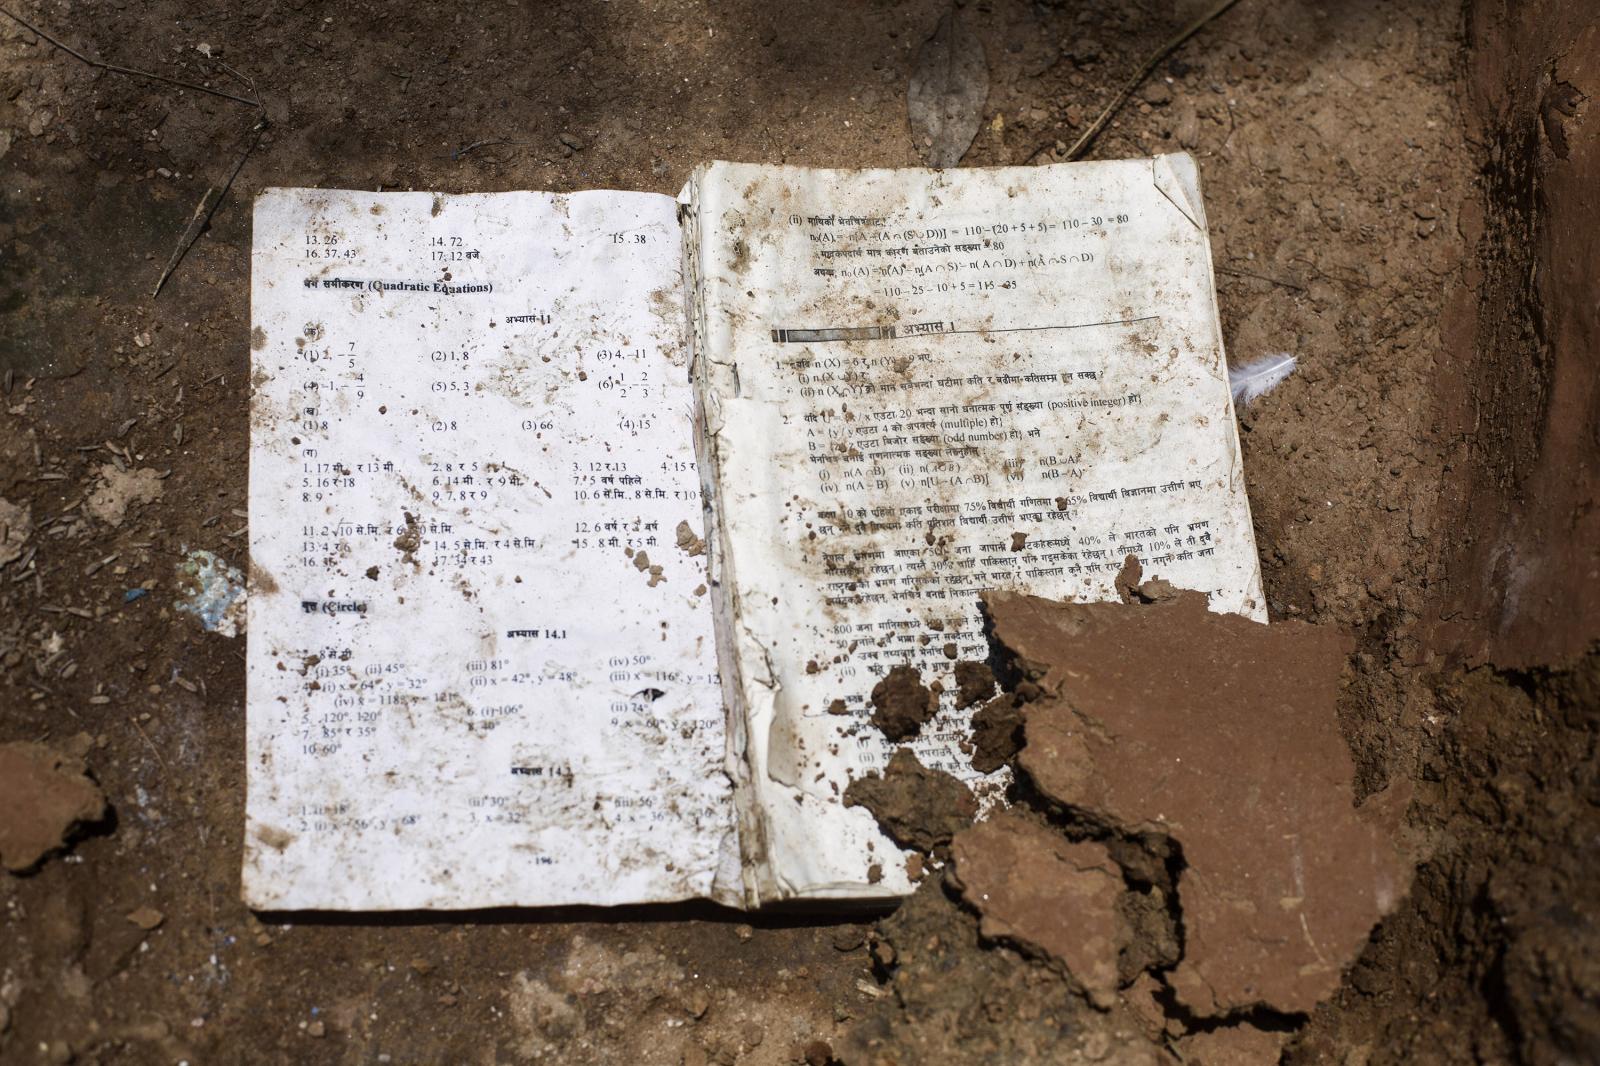 Nepal: Aftermath - A damaged school notebook is seens at the floor in...